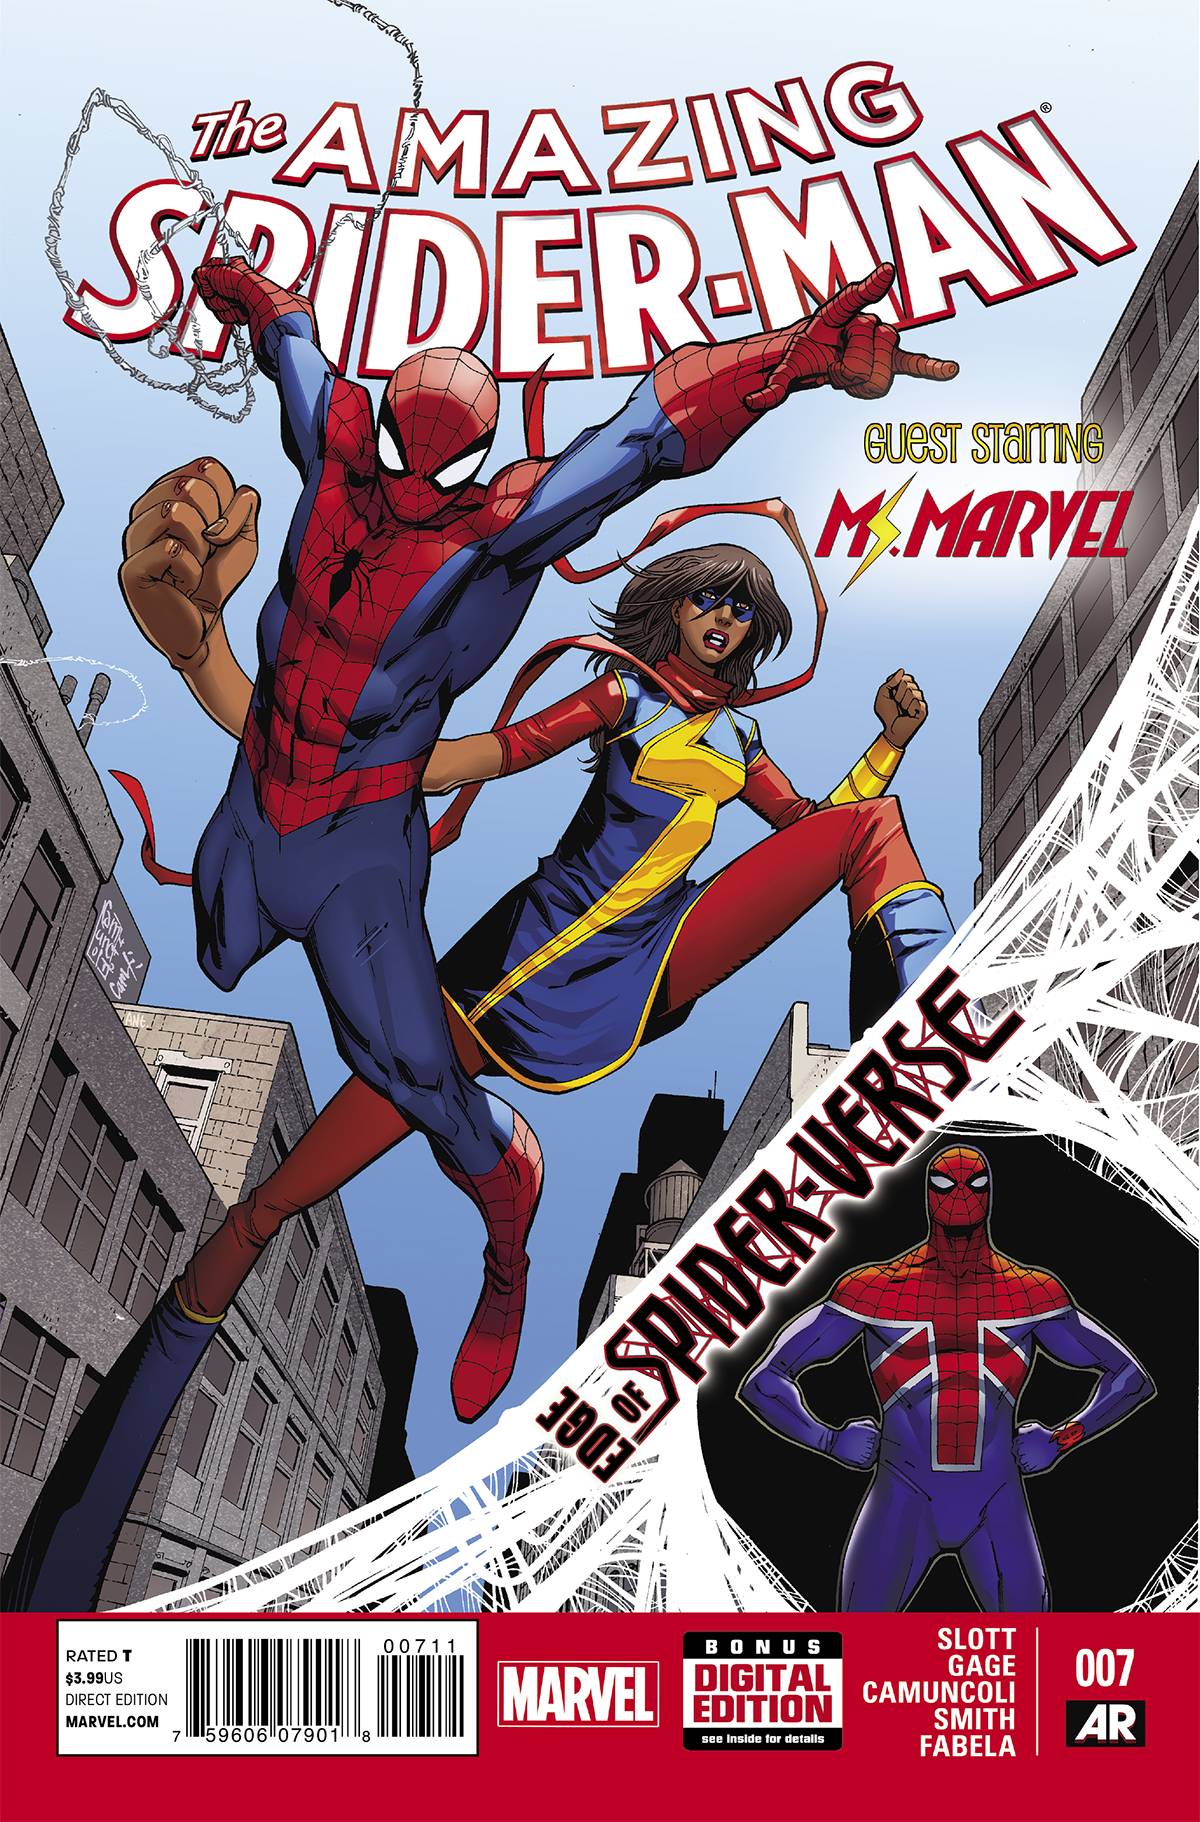 AMAZING SPIDER-MAN VOL 3 (2014) #7 EOSV (FIRST APPEARANCE OF SPIDER UK - BILLY BRADDOCK)